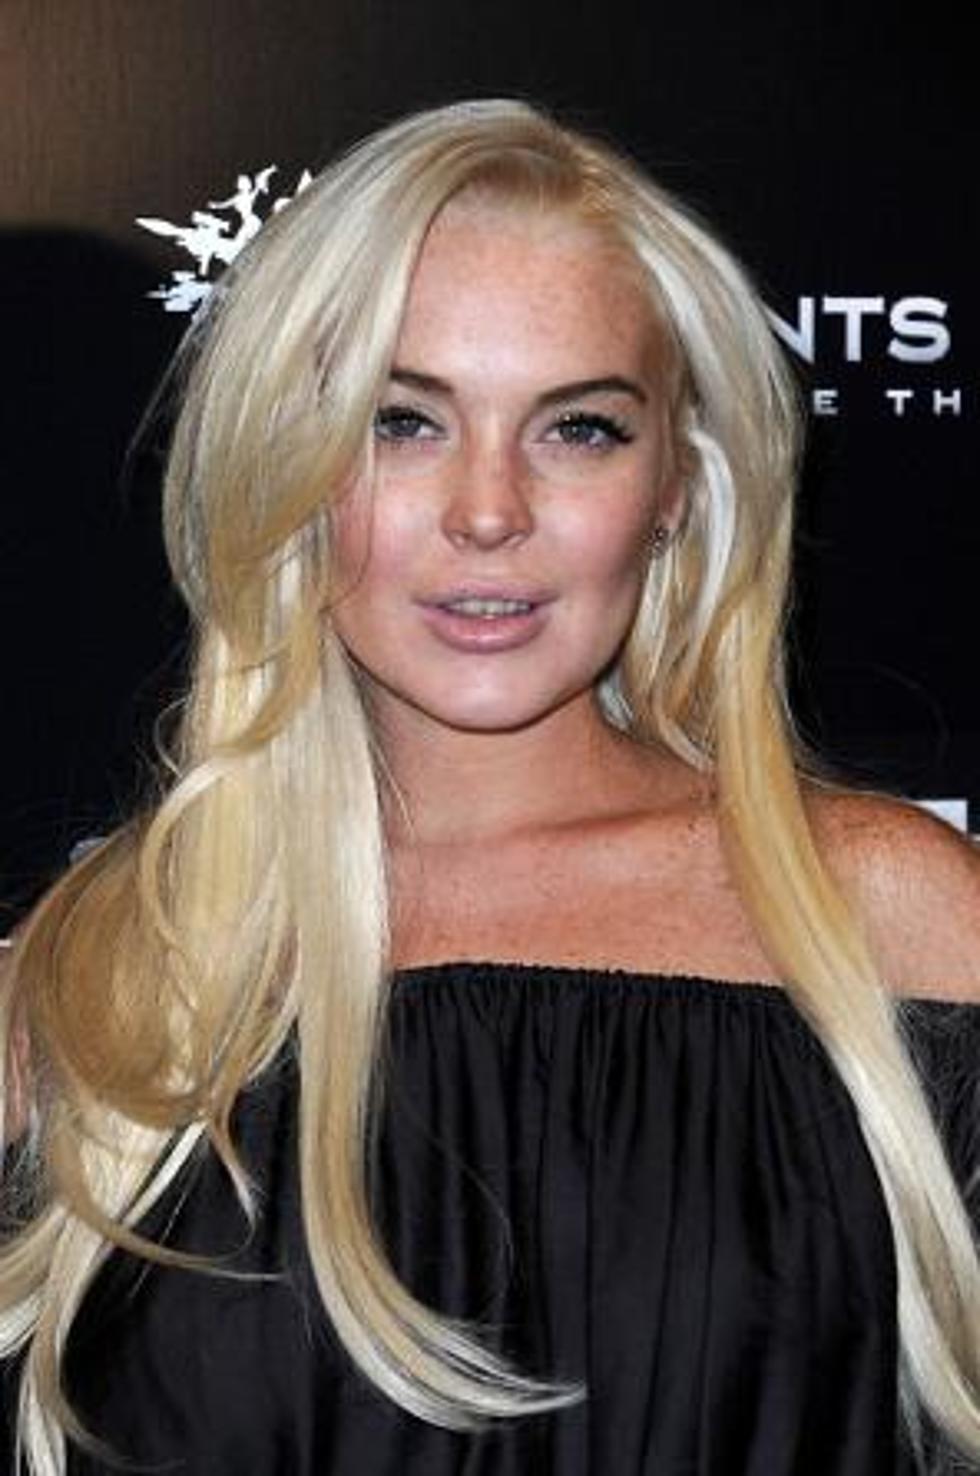 Hollywood Dirt: Linday Lohan’s Jacked up Teeth & Demi Moore’s Super Skinny Frame [PHOTOS]